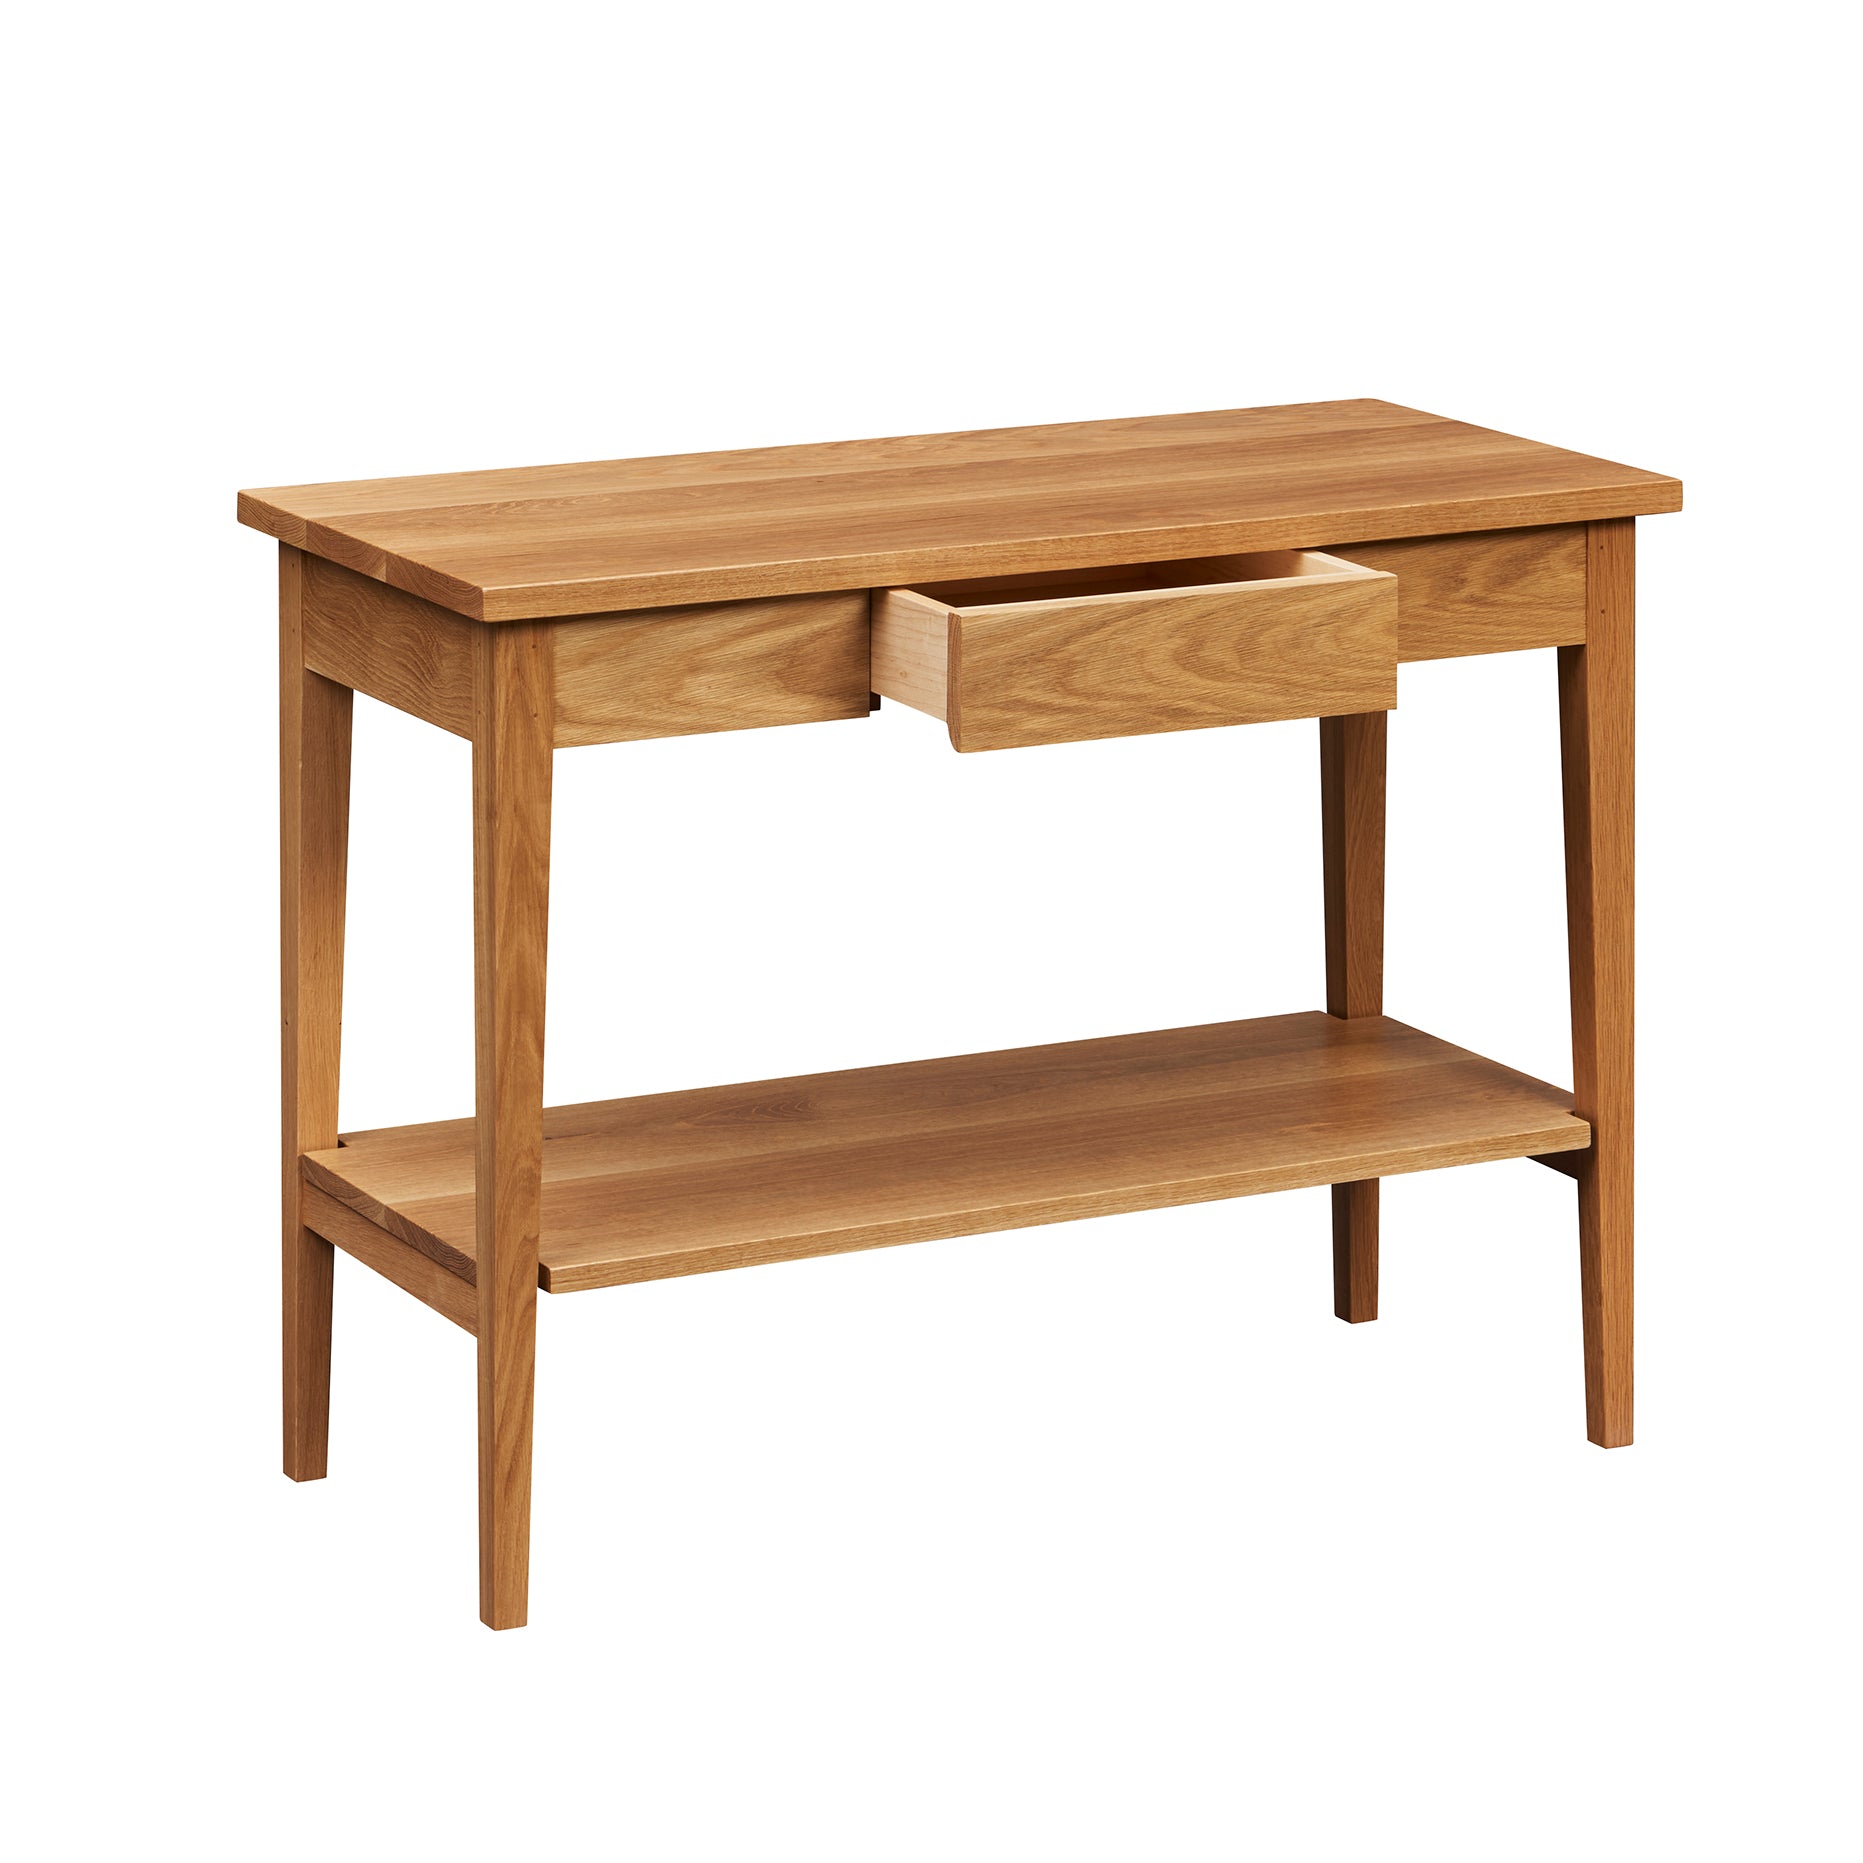 Shaker Heirloom Console Table with a shelf and drawer in white oak